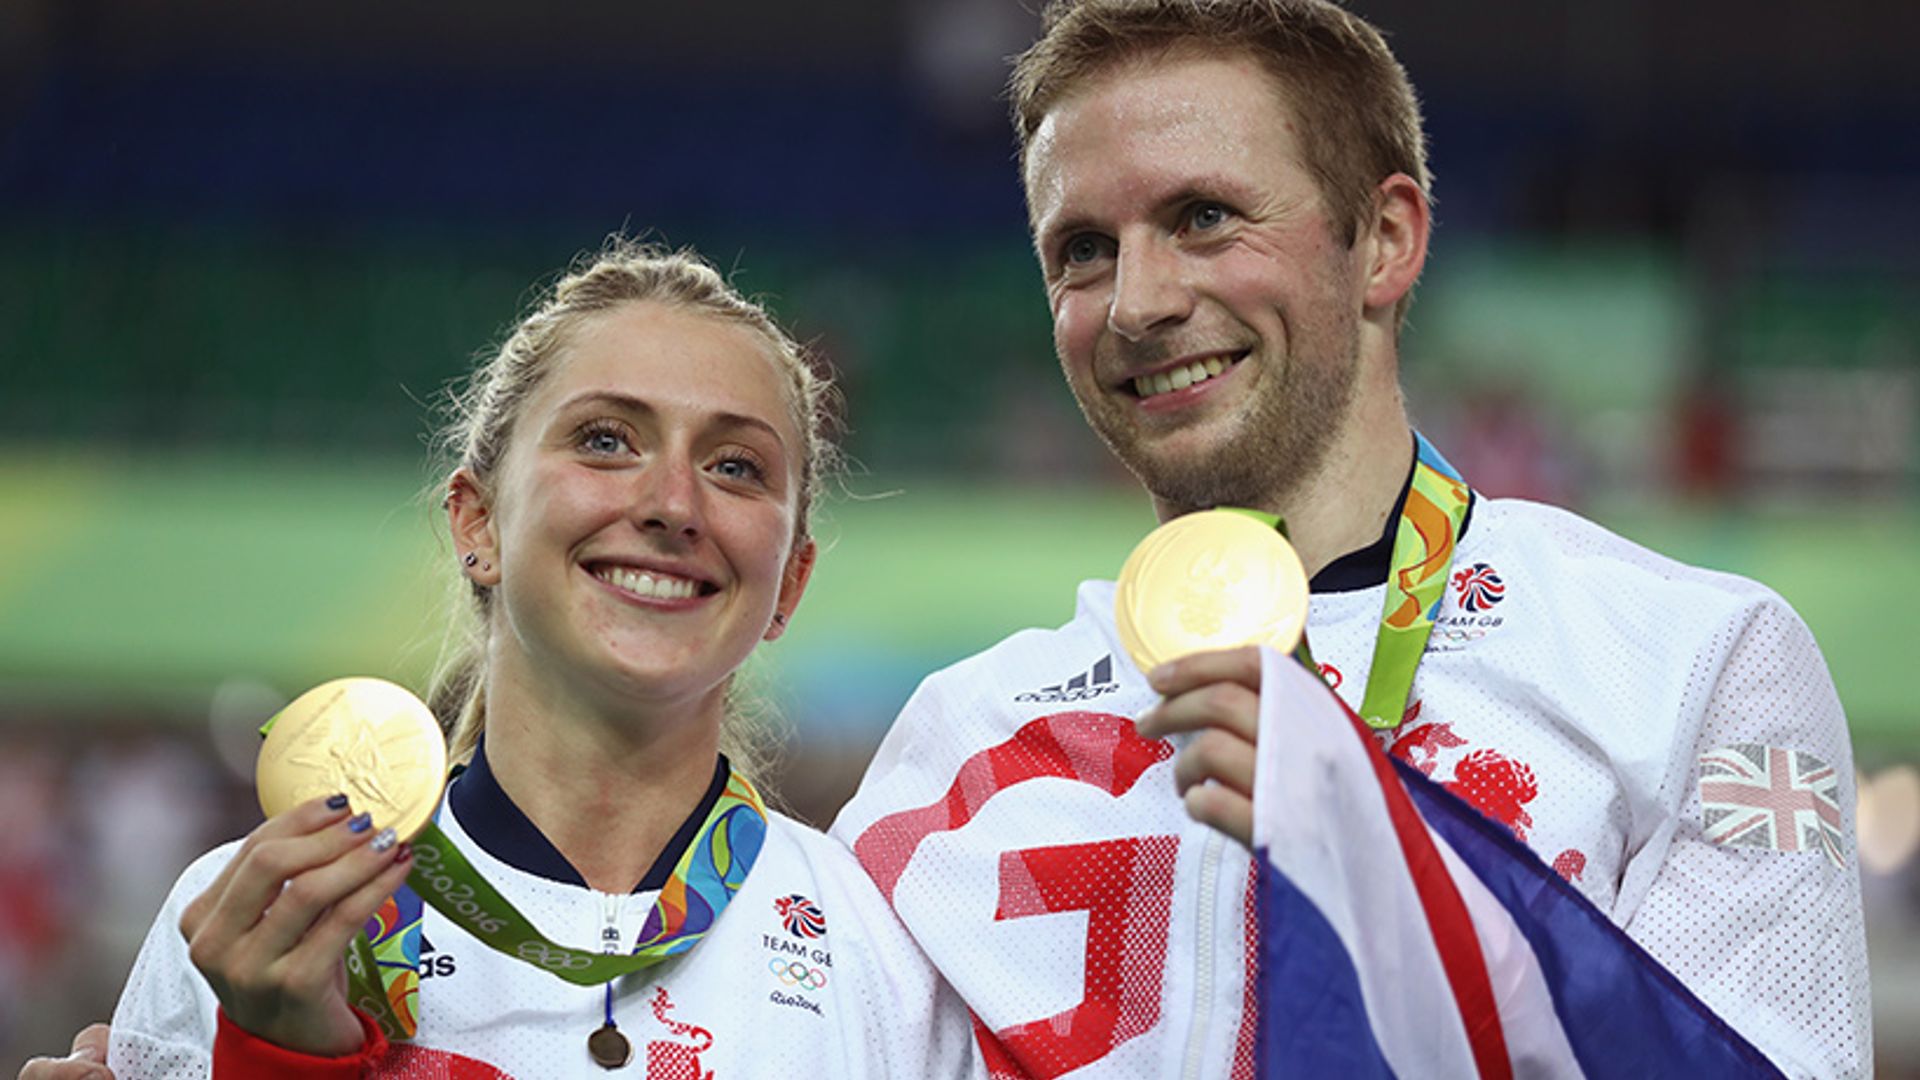 Laura Trott and Jason Kenny: Everything you need to know about the Olympic power couple